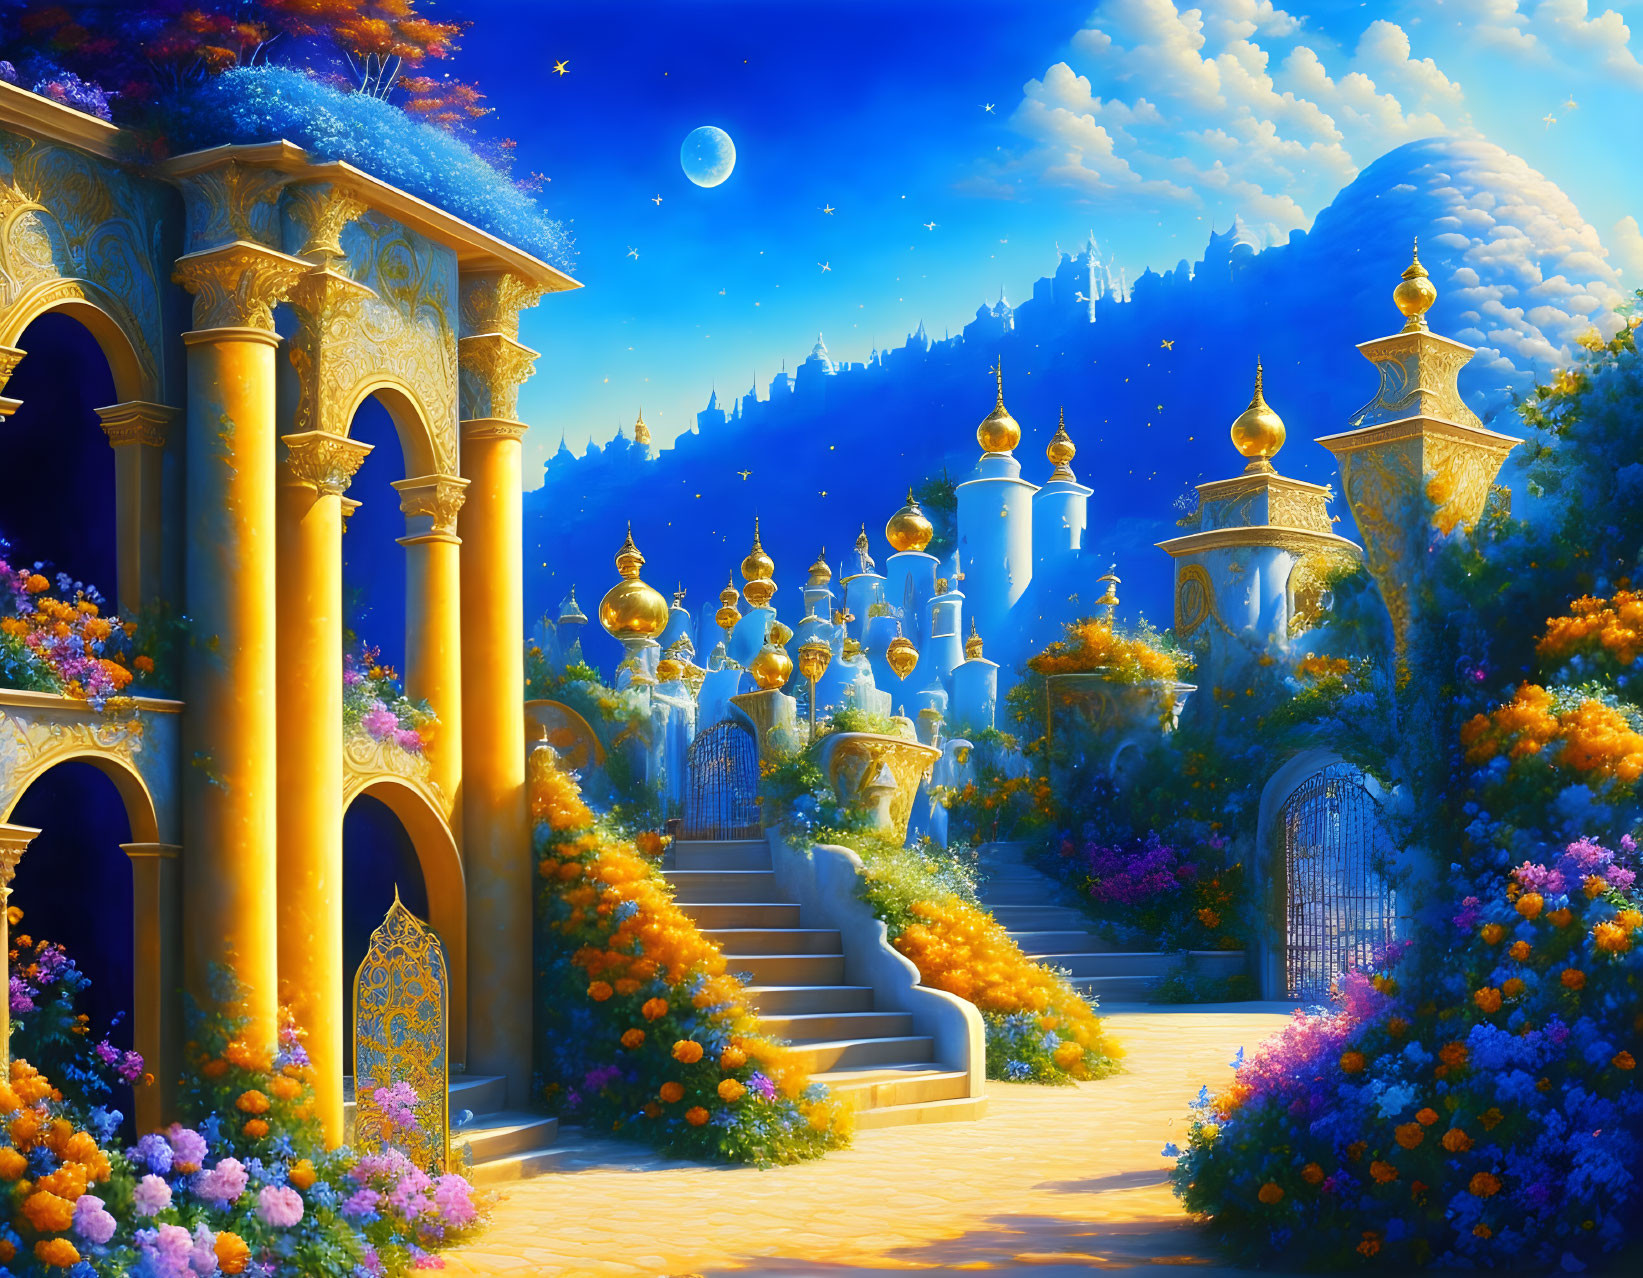 Fantasy landscape with golden-domed structures in lush gardens under starry sky